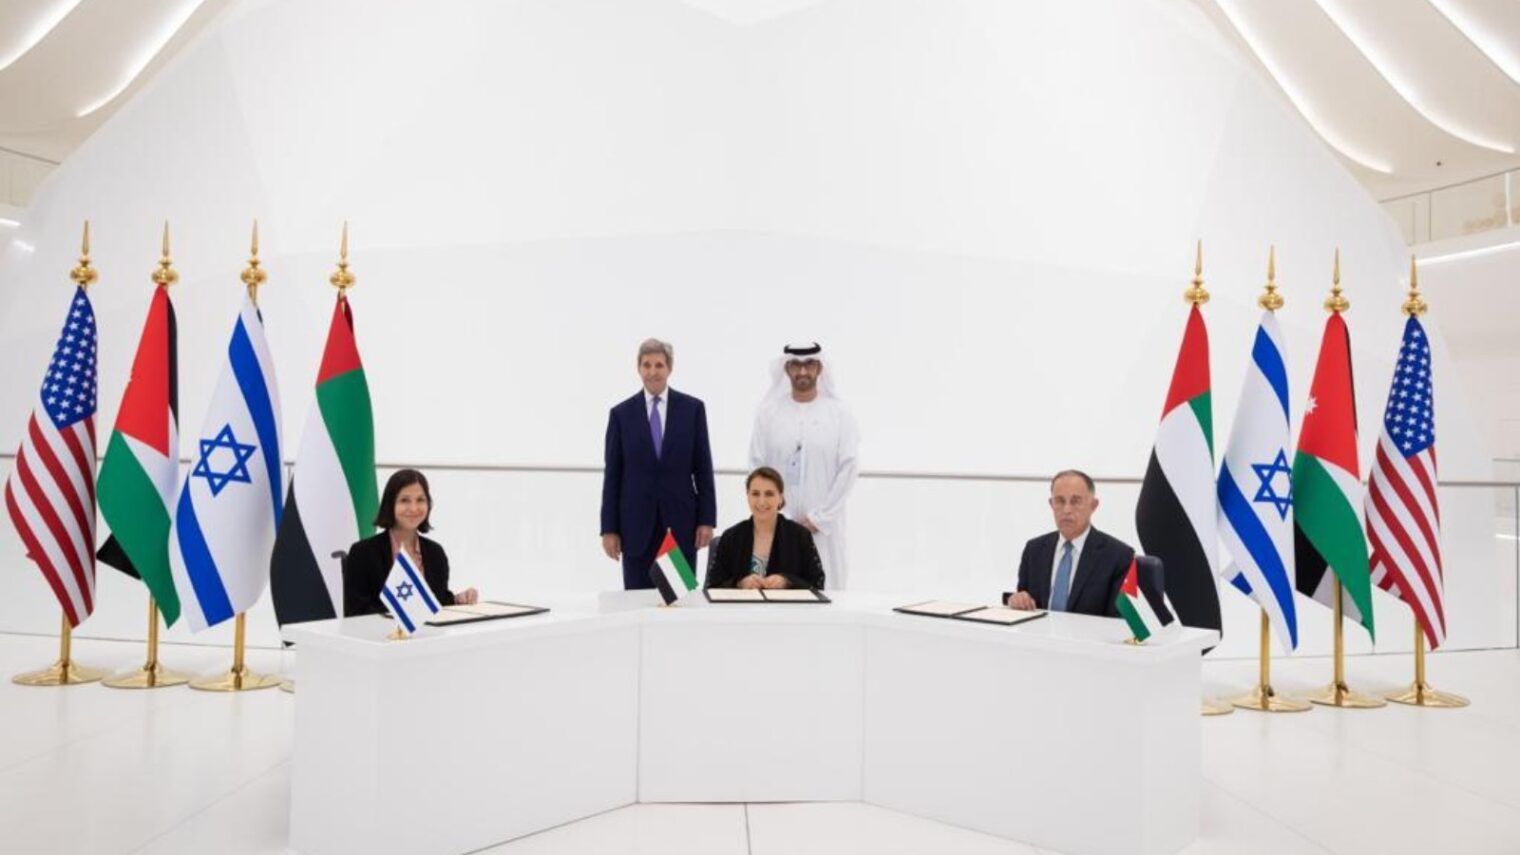 Israeli Energy and Water Resources Minister Karine Elharrar, UAE Climate Change Minister Mariam Almheiri and Jordan Water and Irrigation Minister Mohammed Al-Najjar sign a water agreement at the Dubai Expo on November 22, 2021, as US Climate Envoy John Kerry and UAE Crown Prince Mohammed bin Zayed look on. Photo courtesy of the Israeli Foreign Ministry